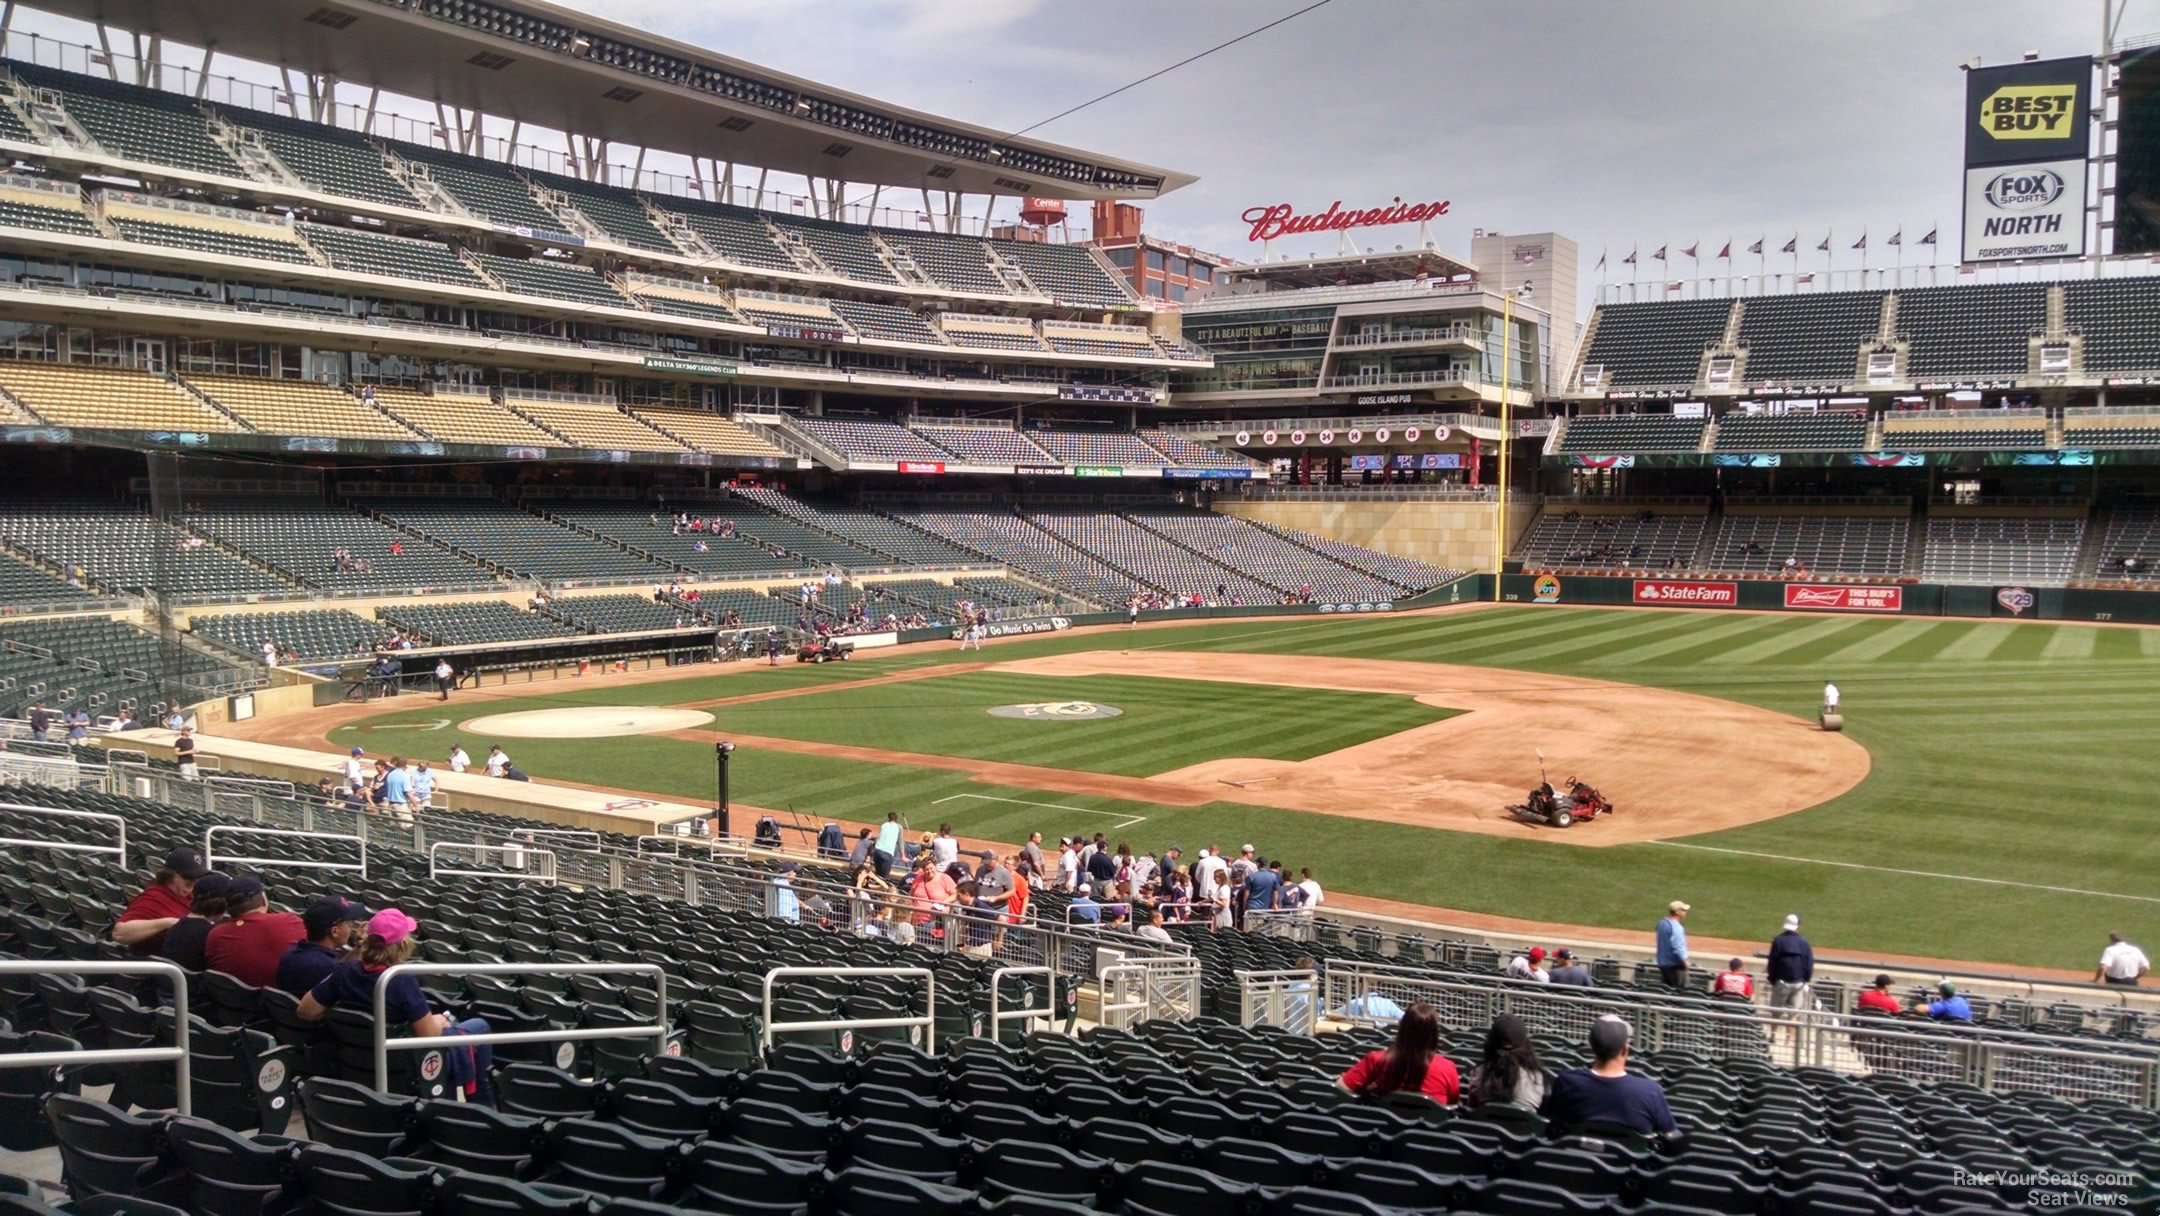 section 106, row 19 seat view  - target field